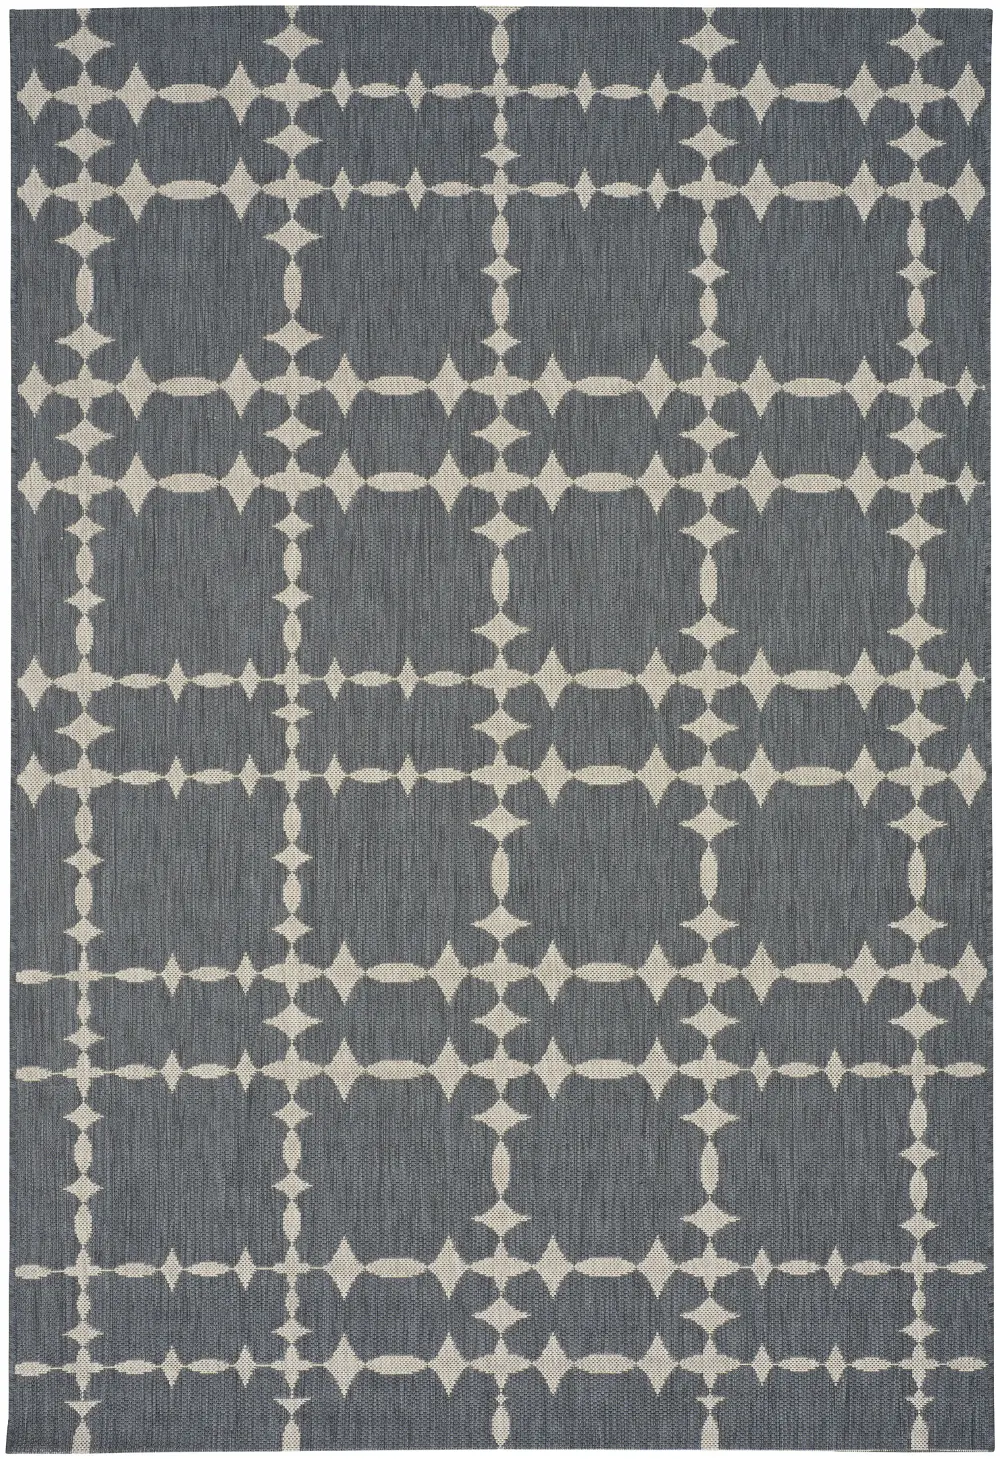 4738RS07101100300 8 x 11 Large Charcoal Gray Indoor-Outdoor Rug - Finesse-Tower Court-1